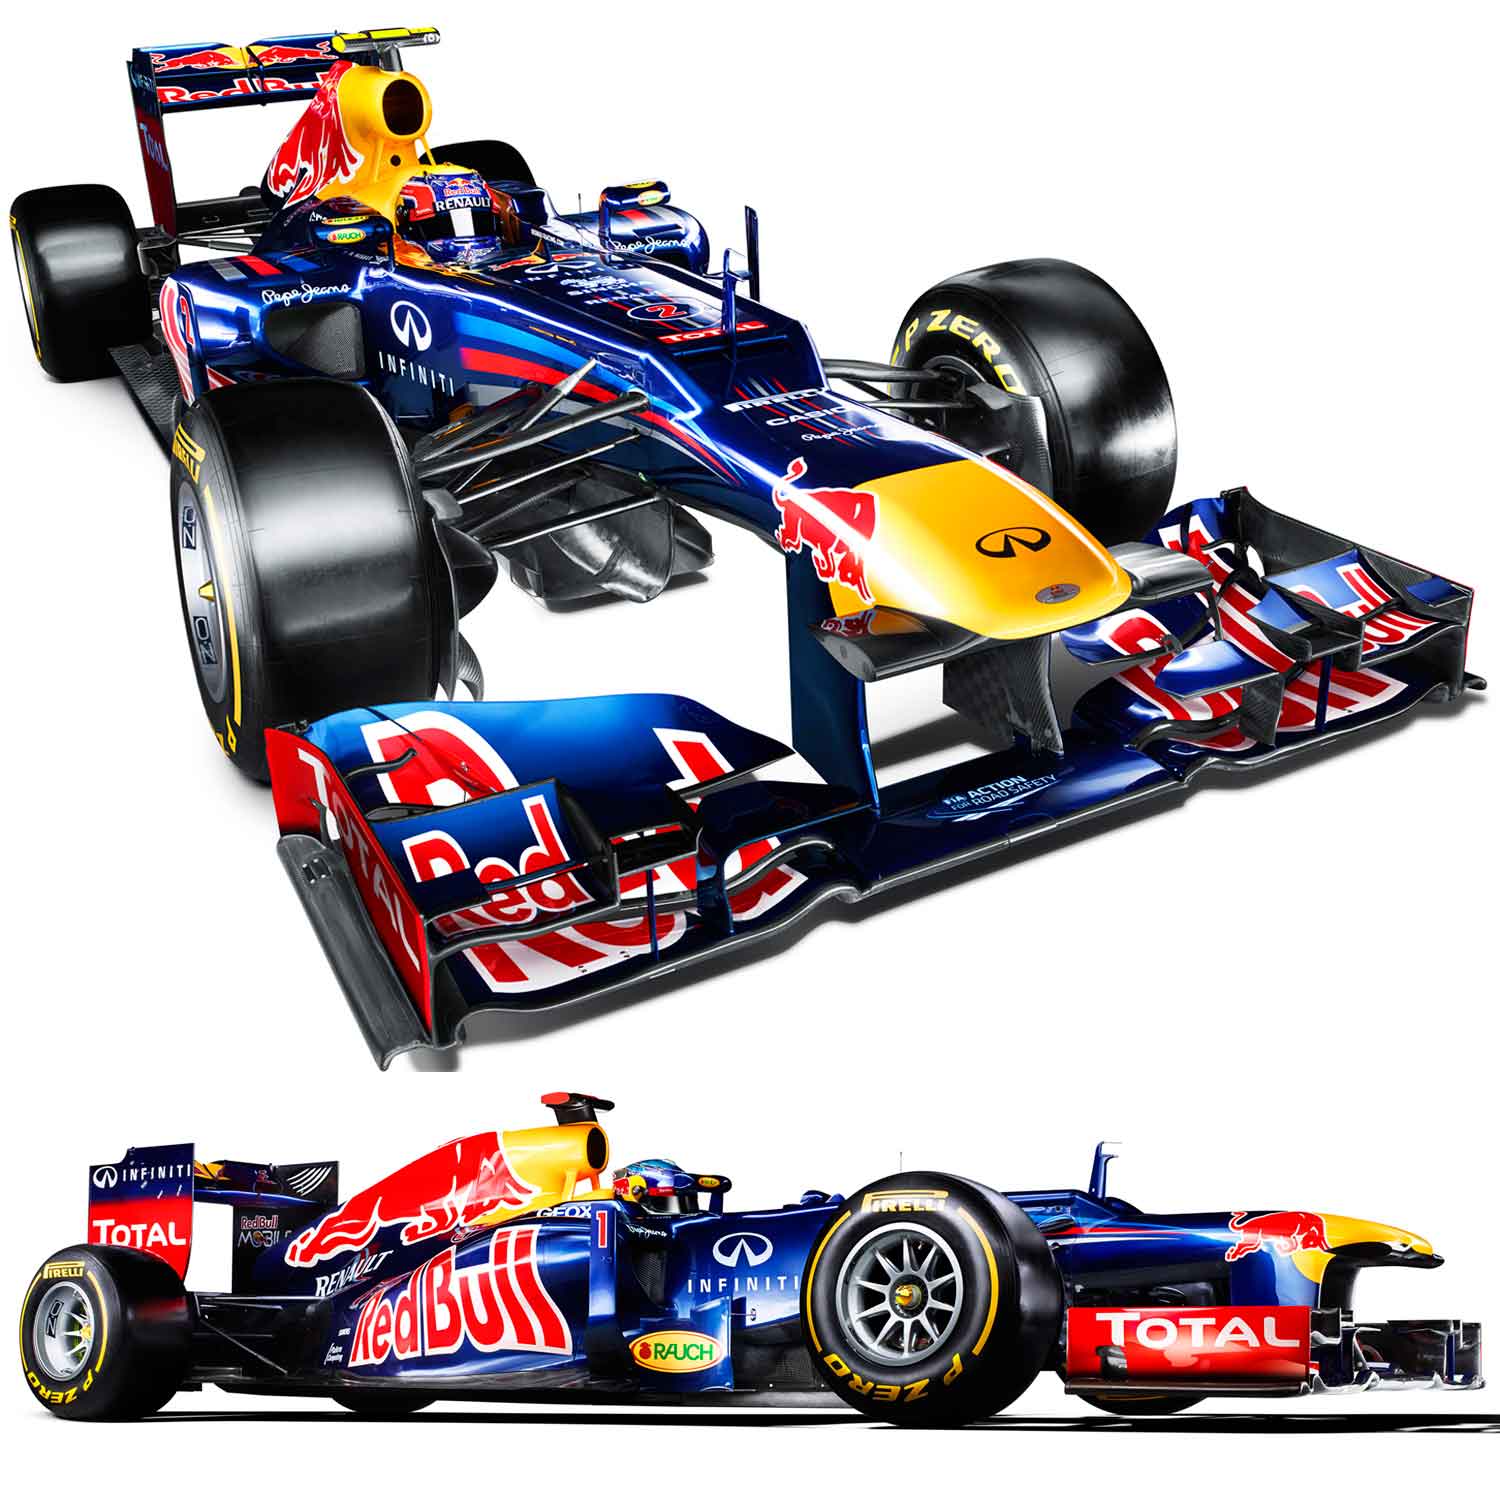 Red Bull Red Bull-Renault: Galerie de photos, informations complètes...